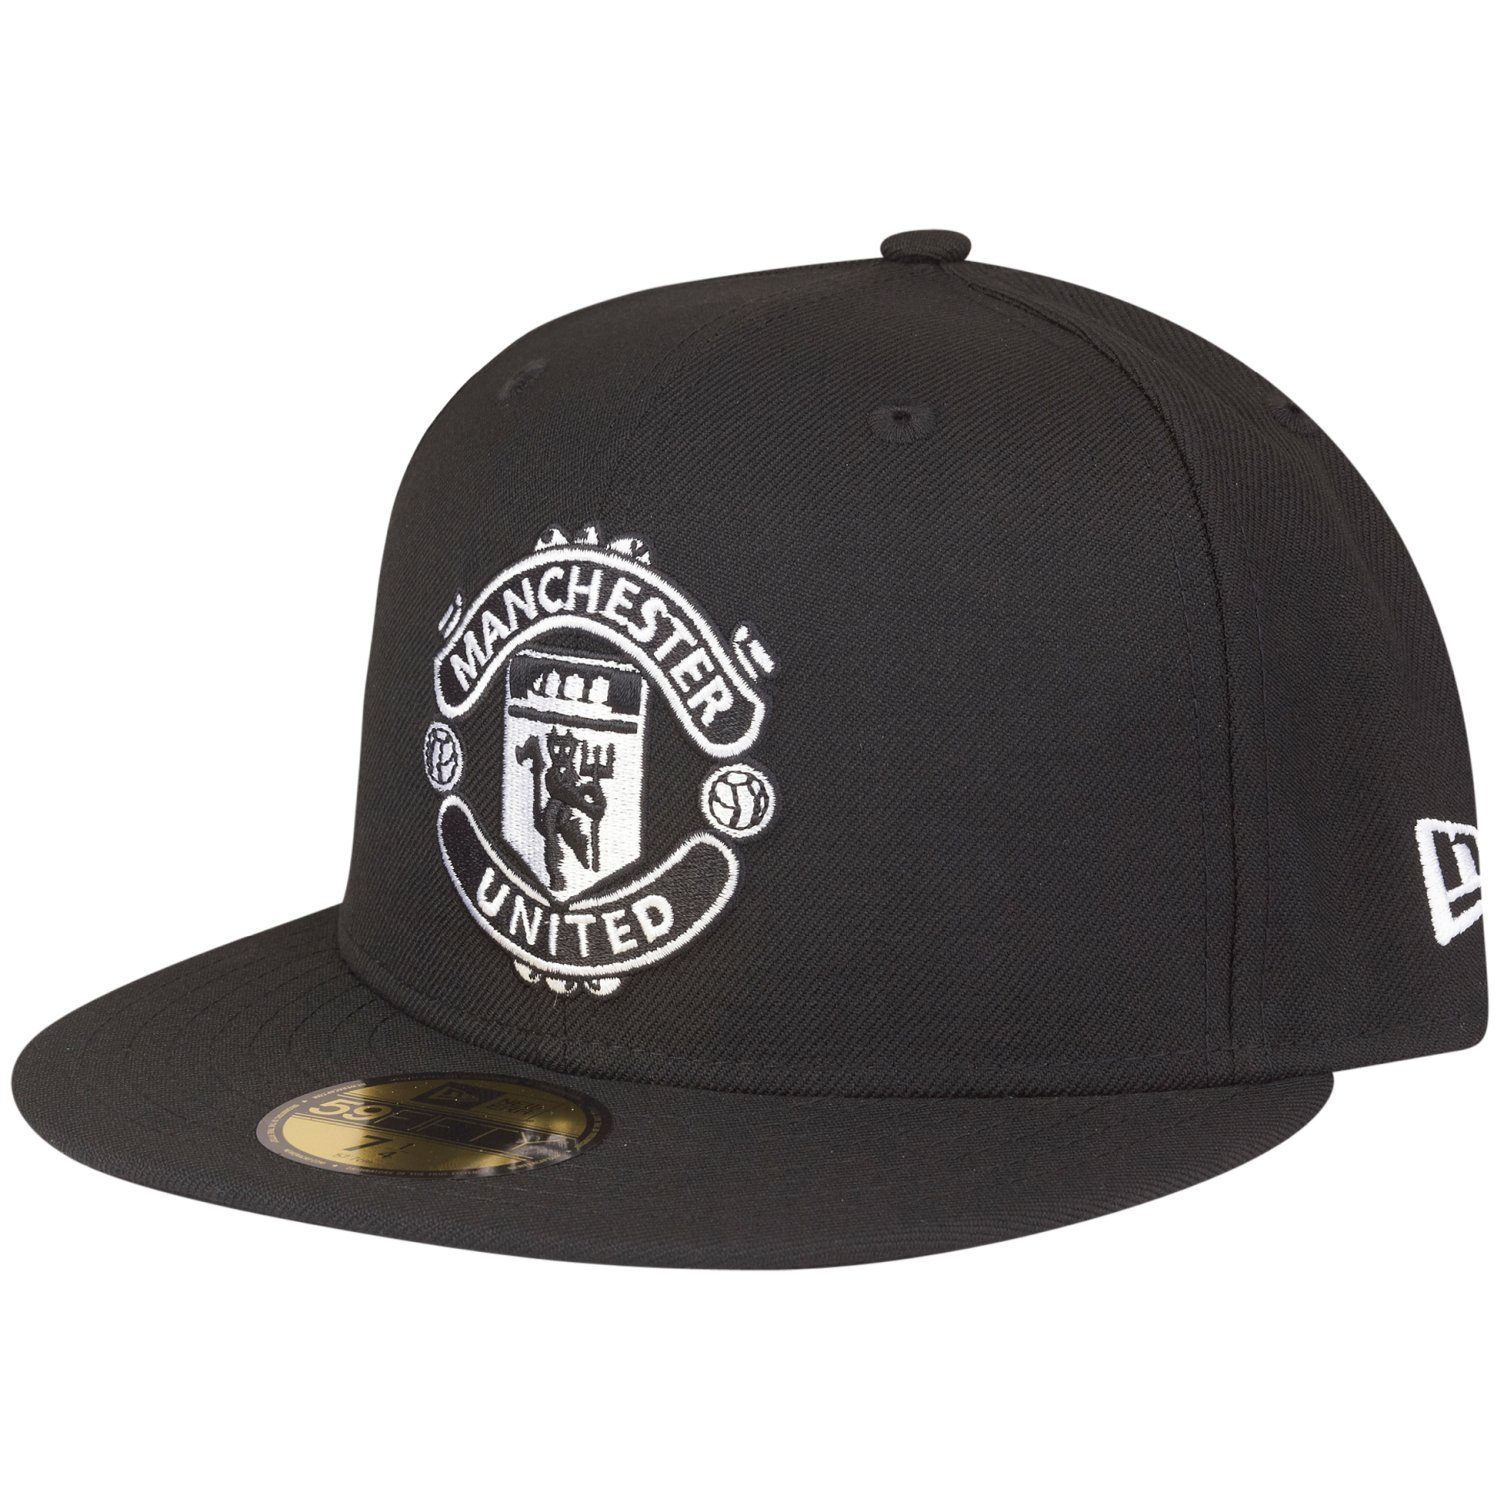 New Manchester United Cap Fitted F.C. Era 59Fifty